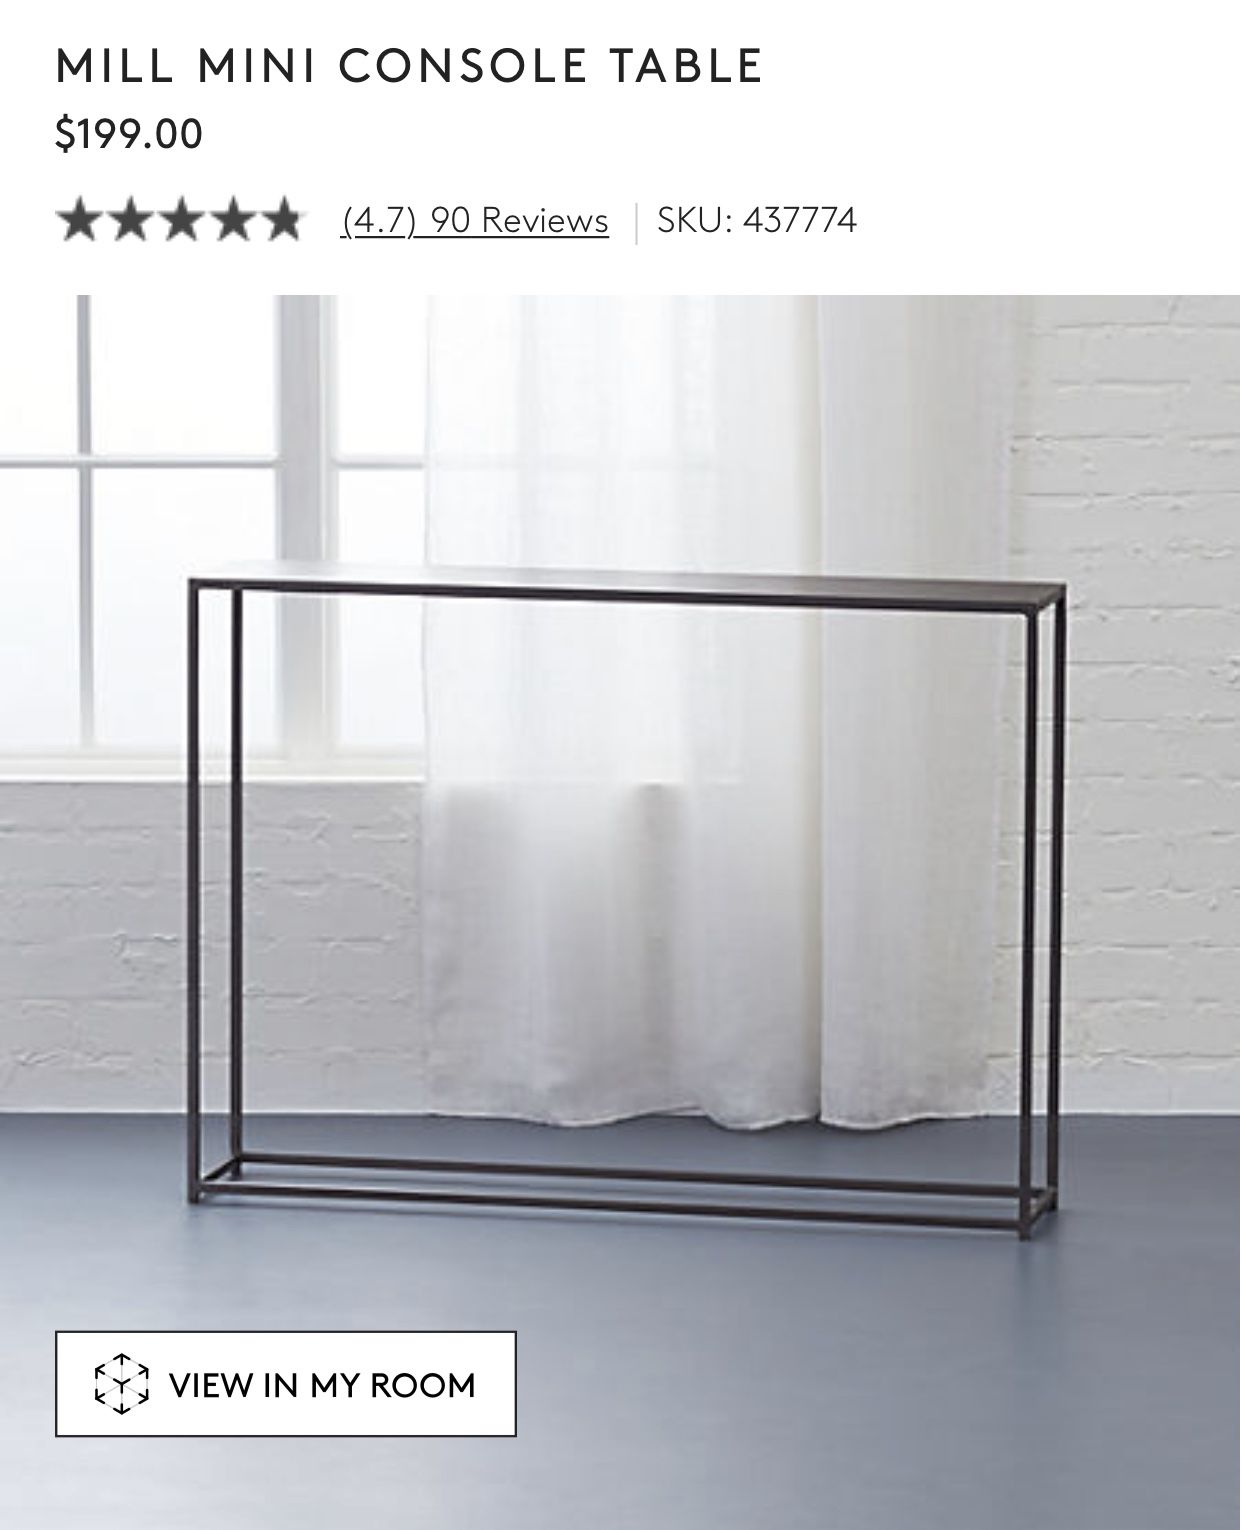 West Elm - Mill Mini Console Table - $150